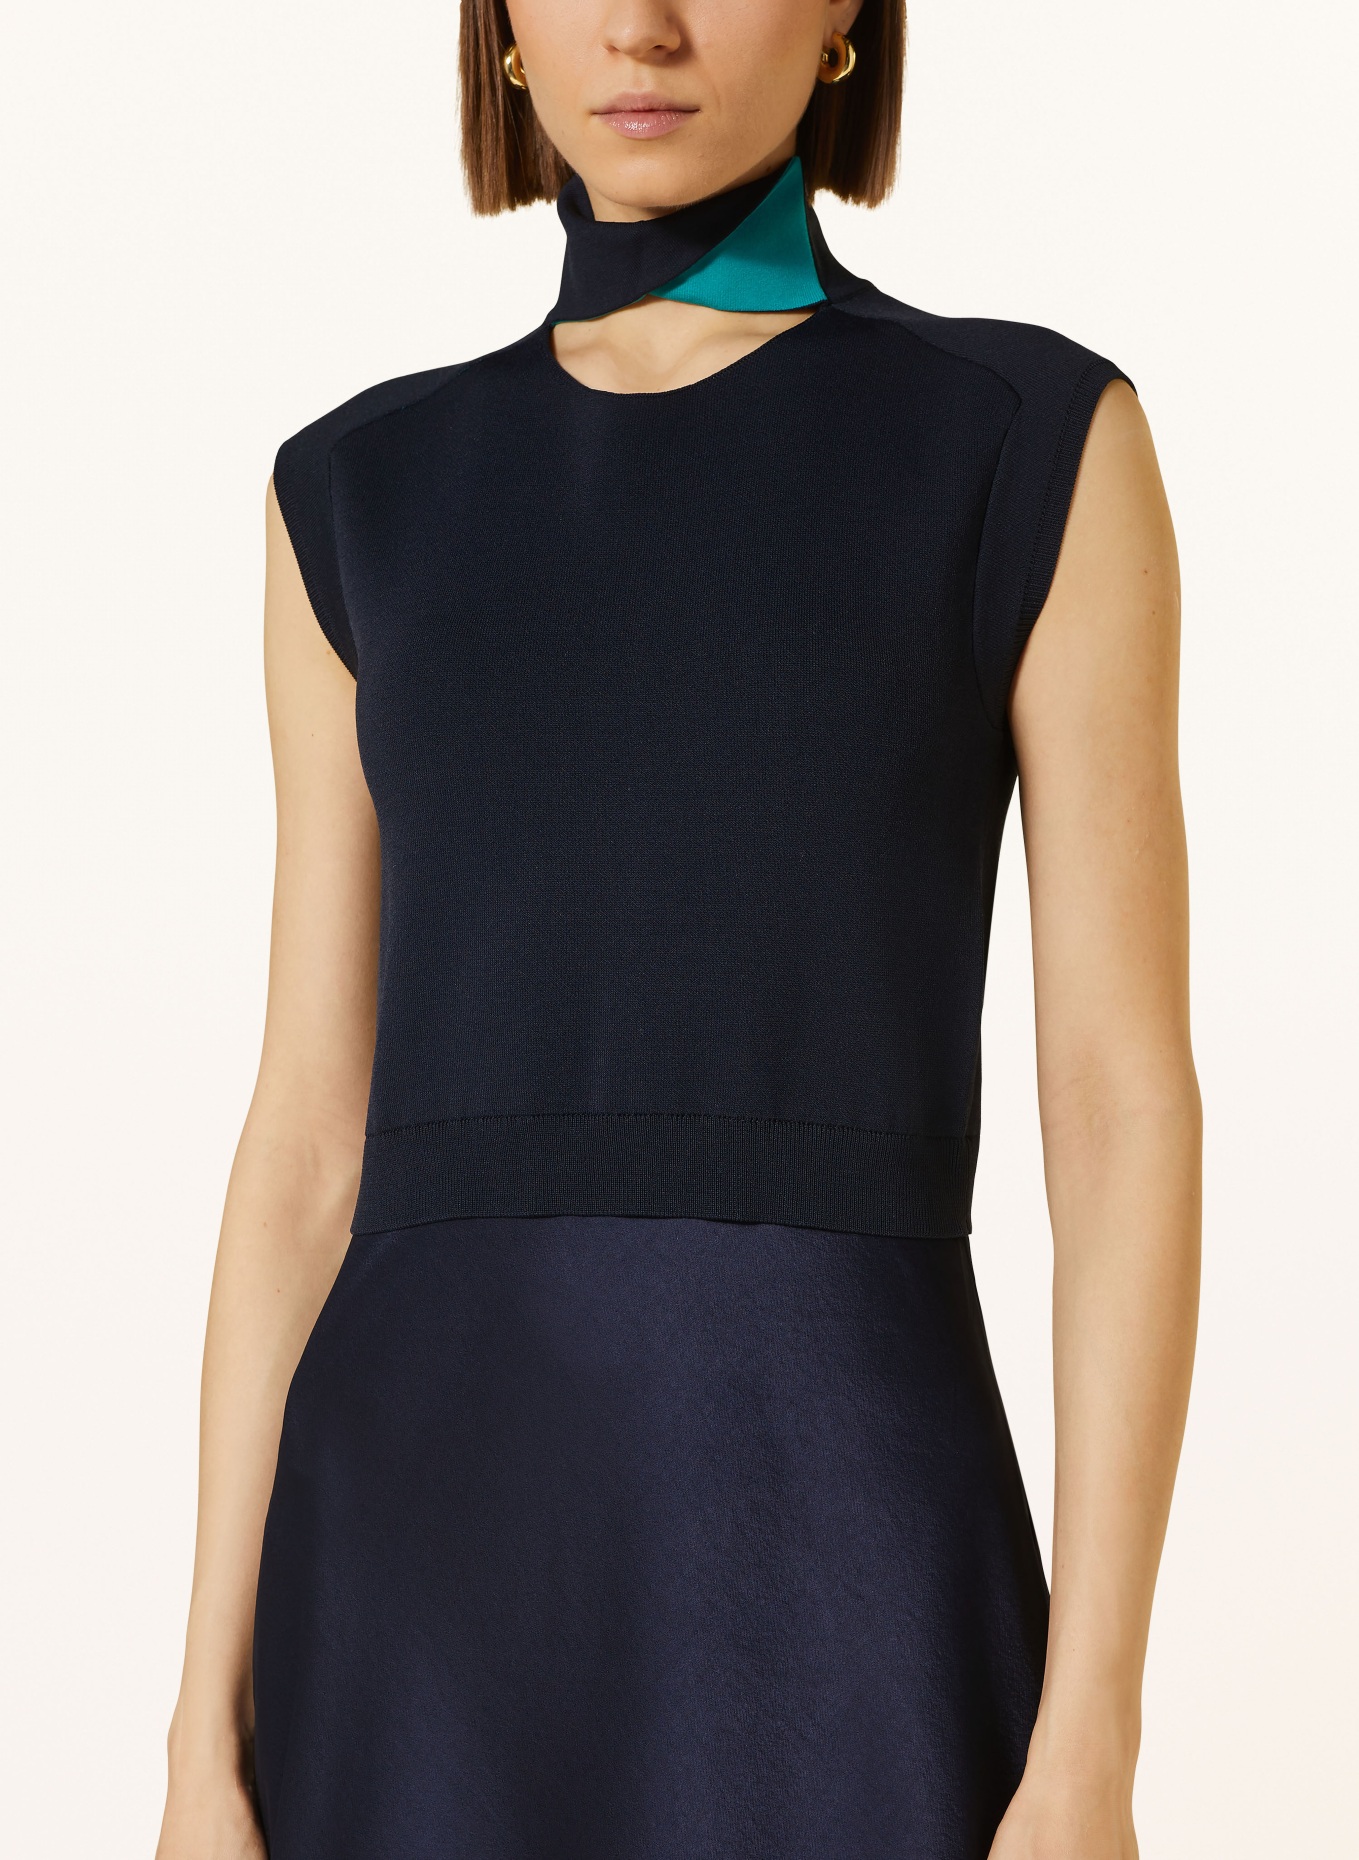 TED BAKER Kleid PAOLLA im Materialmix mit Cut-out, Farbe: DUNKELBLAU (Bild 4)